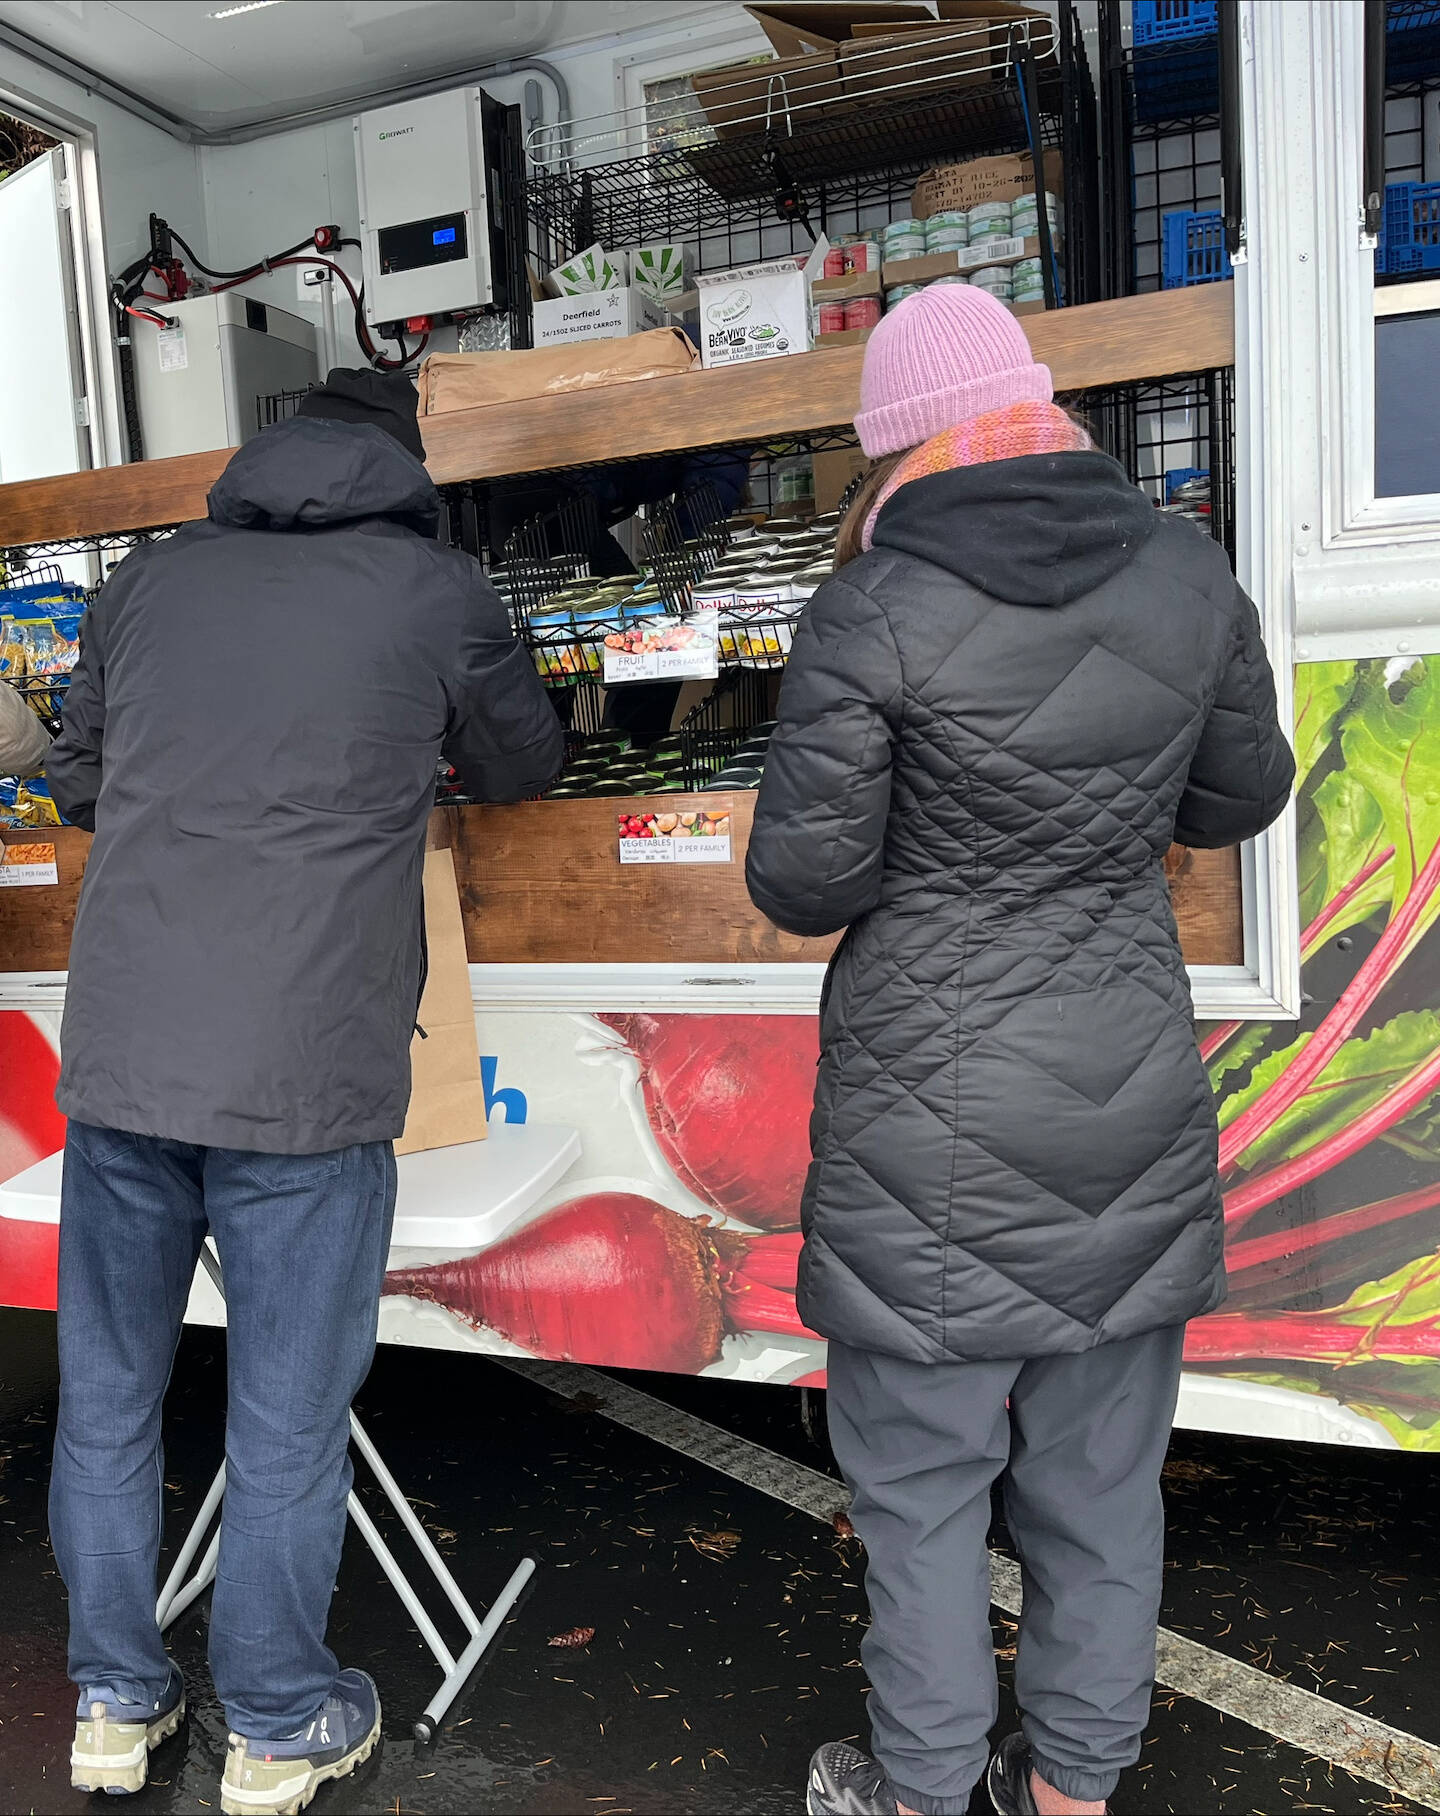 People shop at the Hopelink Mobile Market truck on Mercer Island during a recent visit to the community and event center. Photo courtesy of Mercer Island Youth and Family Services